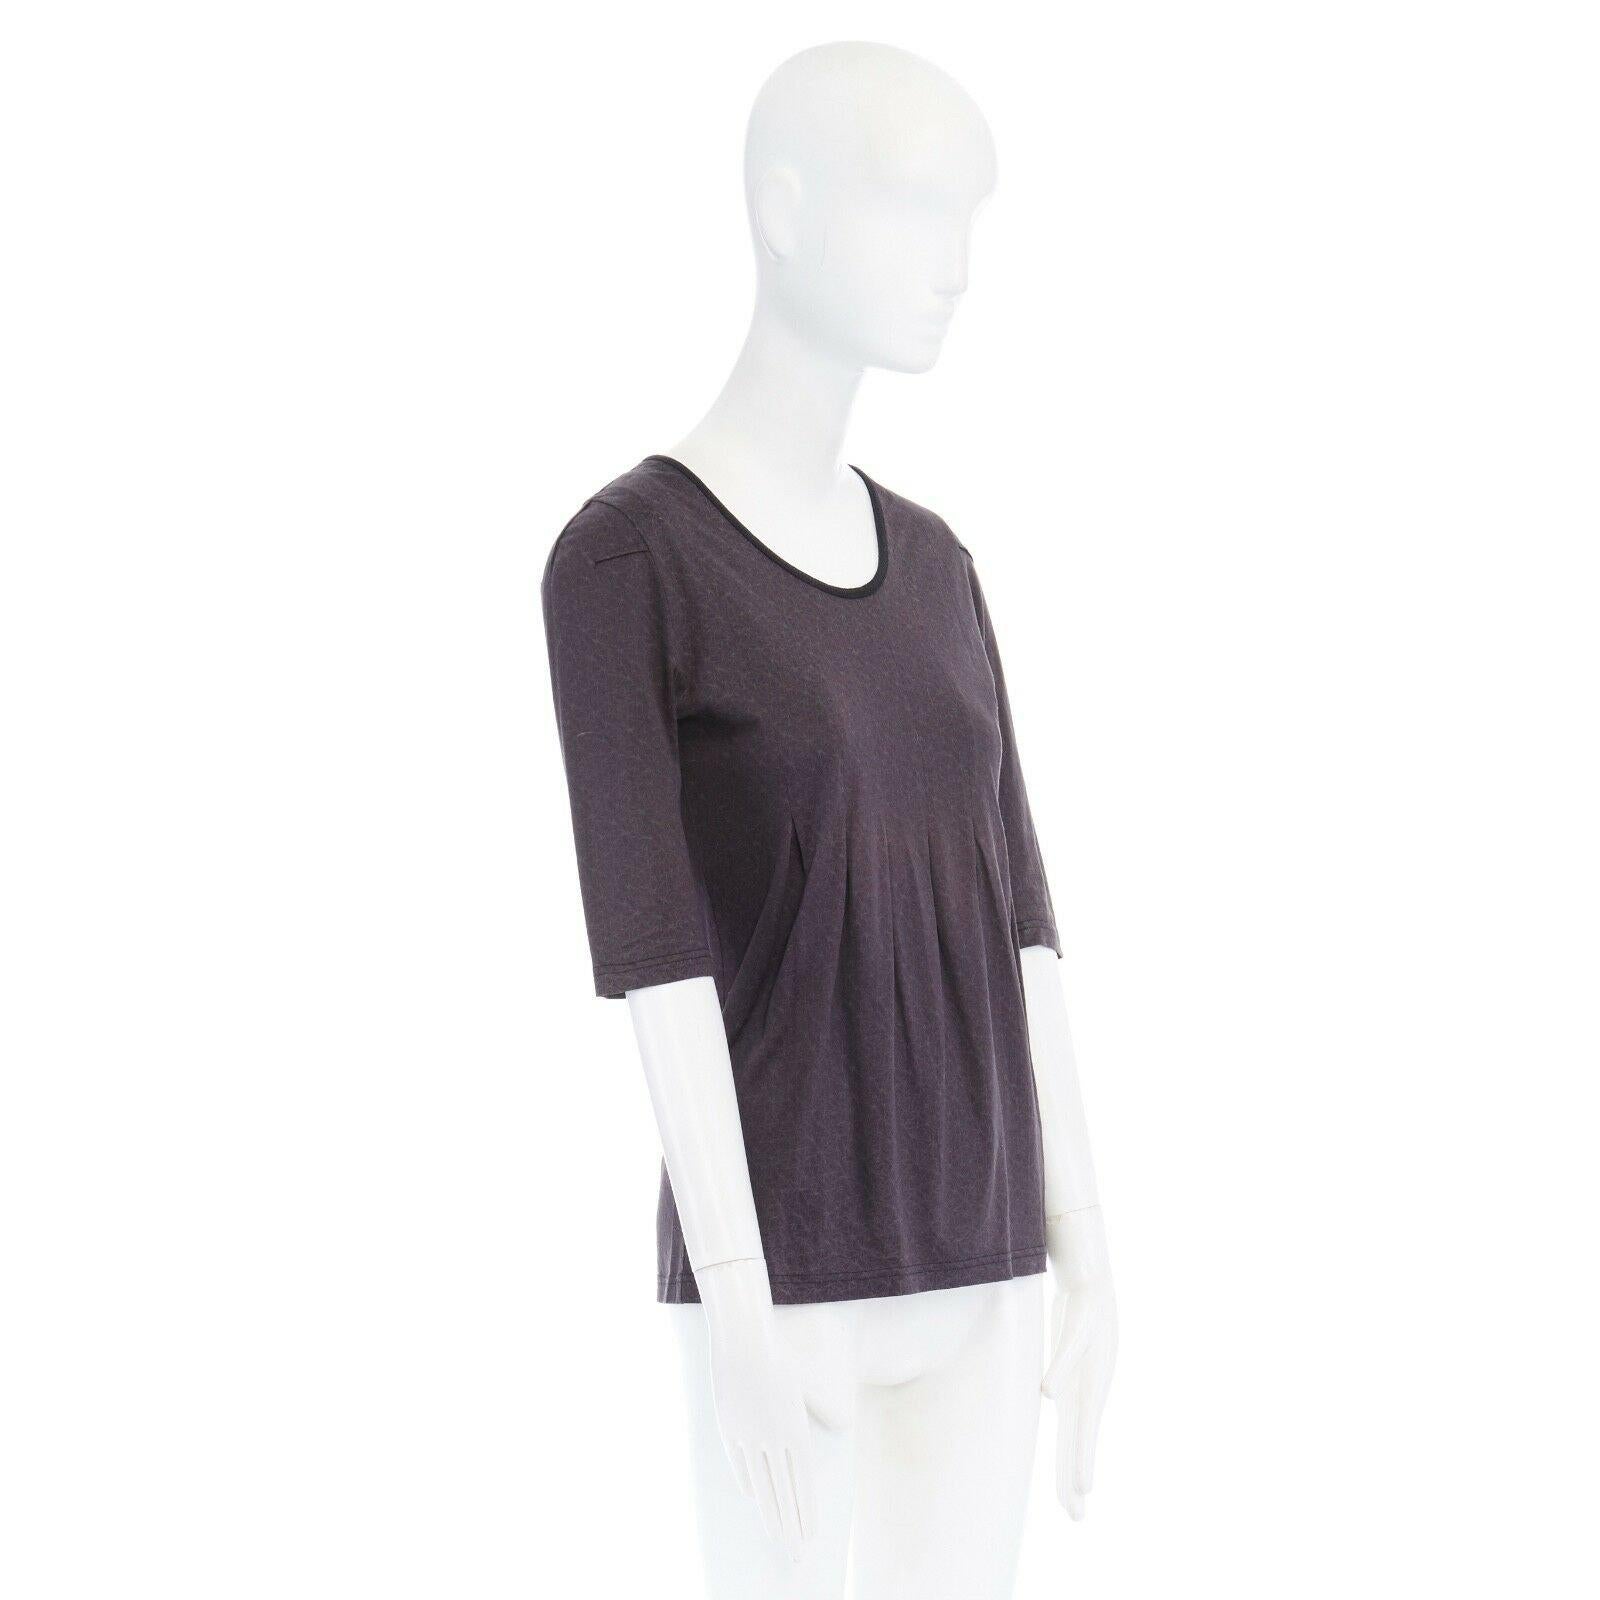 UNDERCOVER 100% cotton grey geometric print scoop beck pleated waist t-shirt JP1
Brand: Undercover
Model Name / Style: Cotton top
Material: Cotton
Color: Grey
Pattern: Geometric
Closure: Pull on
Extra Detail: Ribbed neckline. Dart at shoulder.